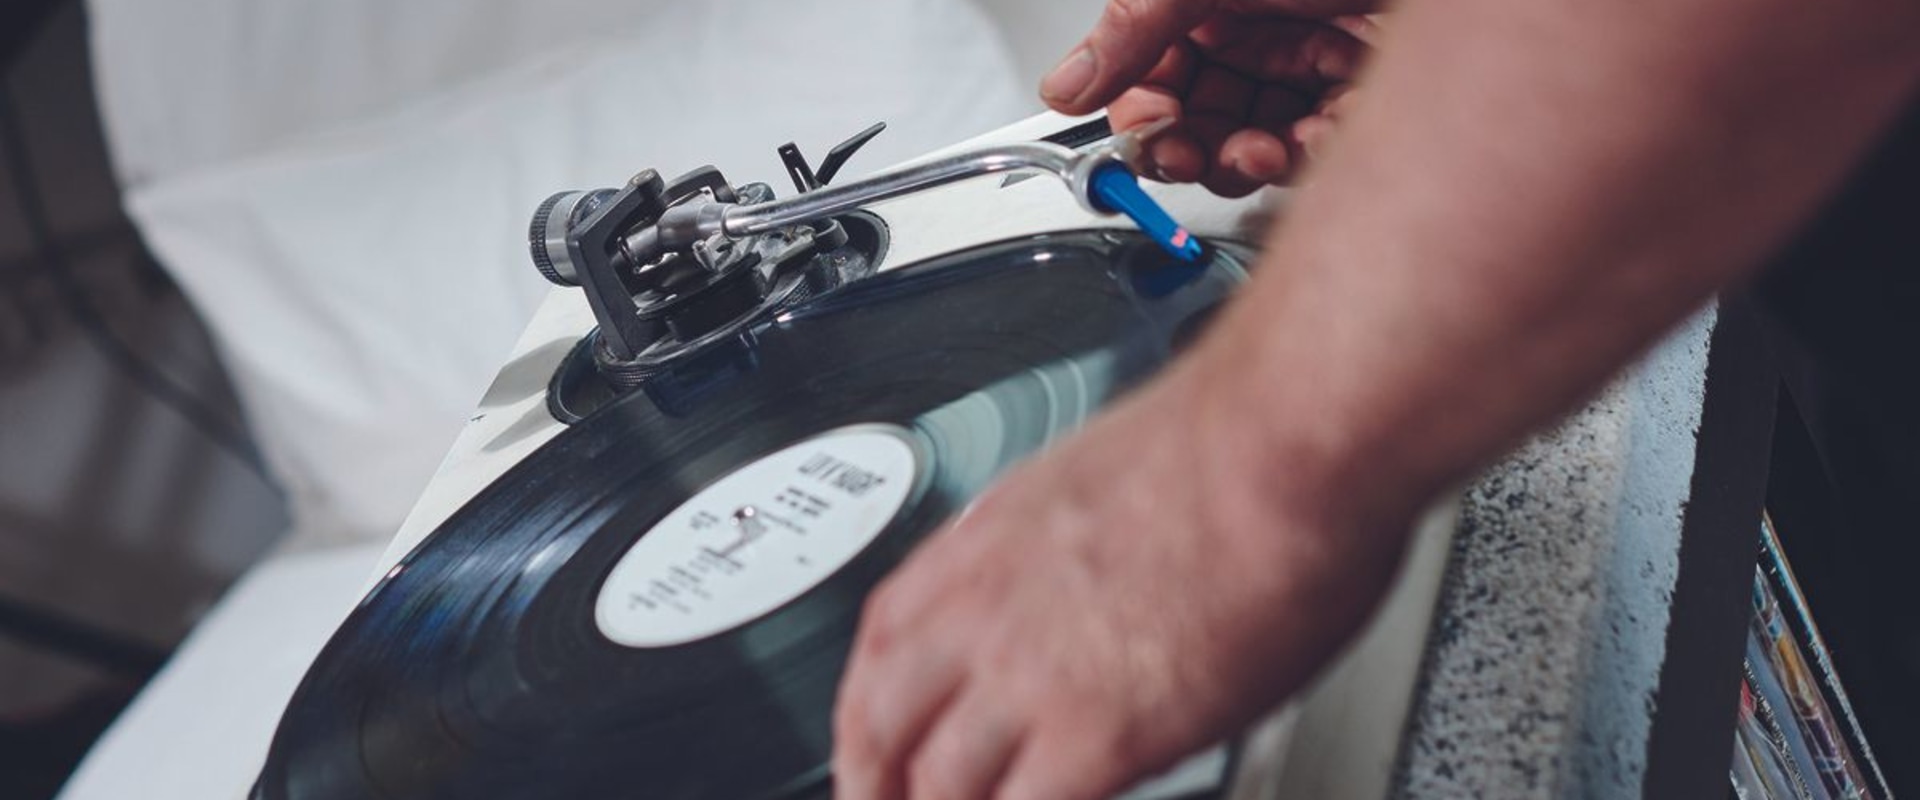 An In-Depth Look at Turntables and CDJs: The Essential DJ Equipment for House Music